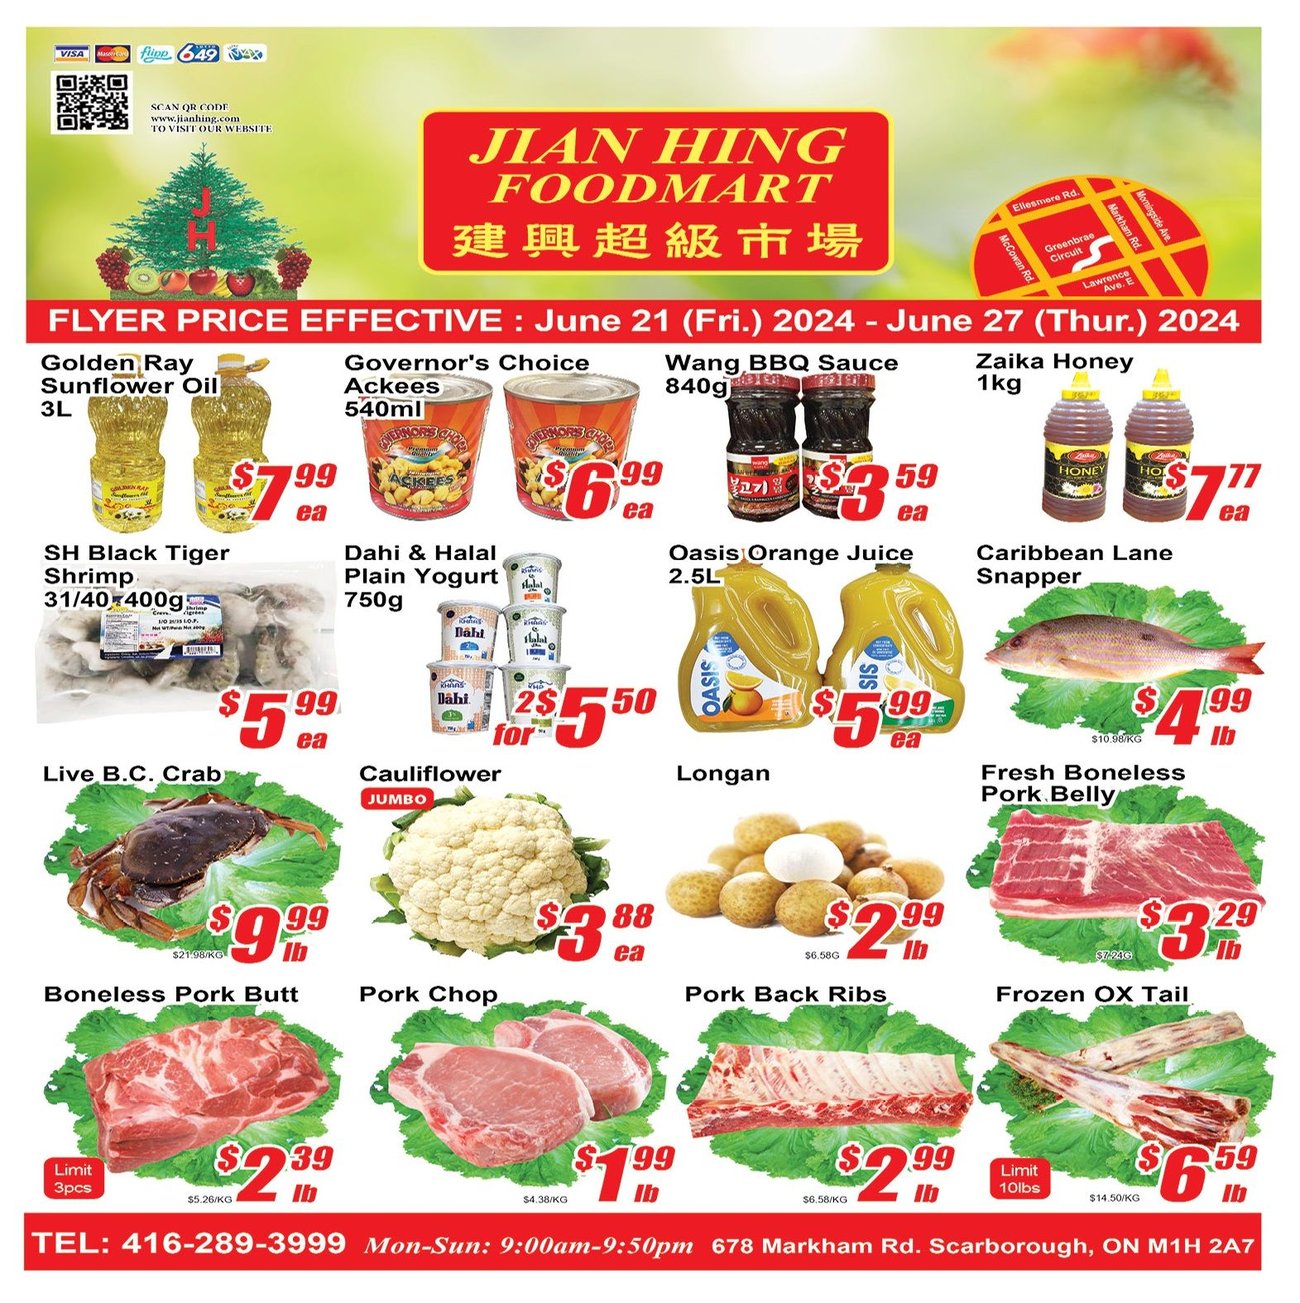 Jian Hing Supermarket - Scarborough Store - Weekly Flyer Specials - Page 1